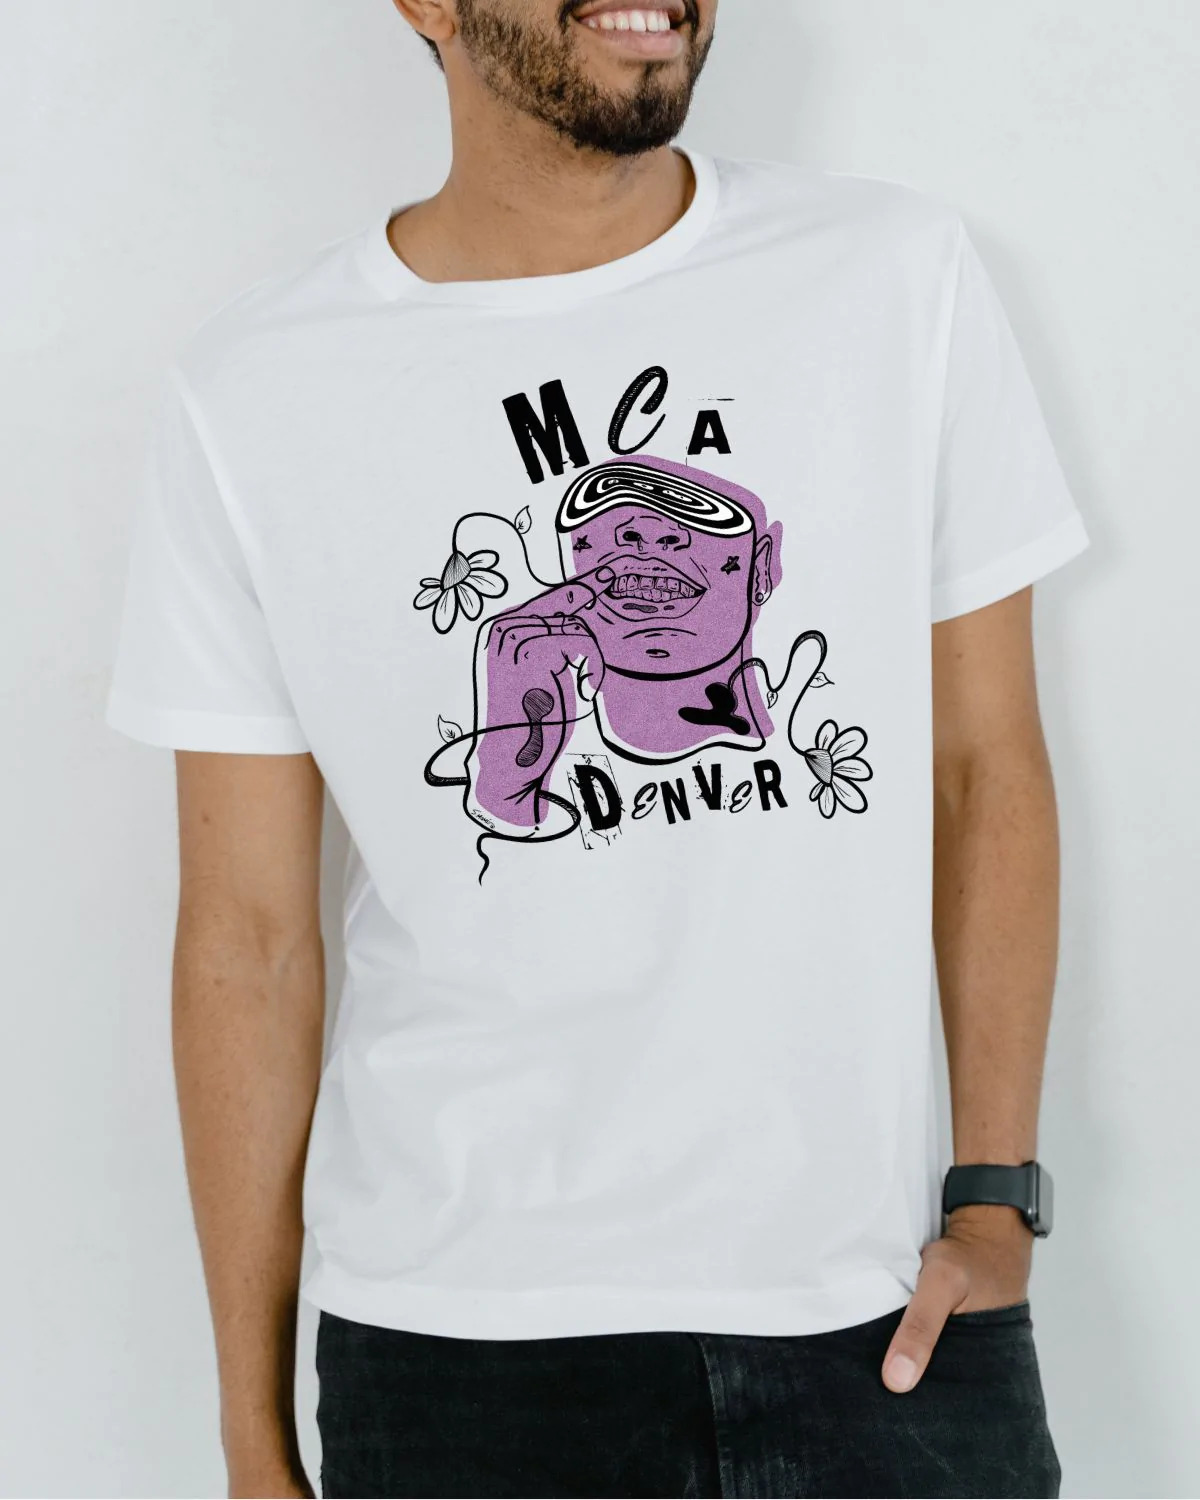 Model posing in front of a white wall and sporting a white t-shirt with a purple design on it. The t-shirt reads, “MCA Denver” and there is a head of a figure on it. The figure is sporting grills, there are flowers surrounding the figure, and there is a swirly vortex replacing where the figure’s eyes might have been.